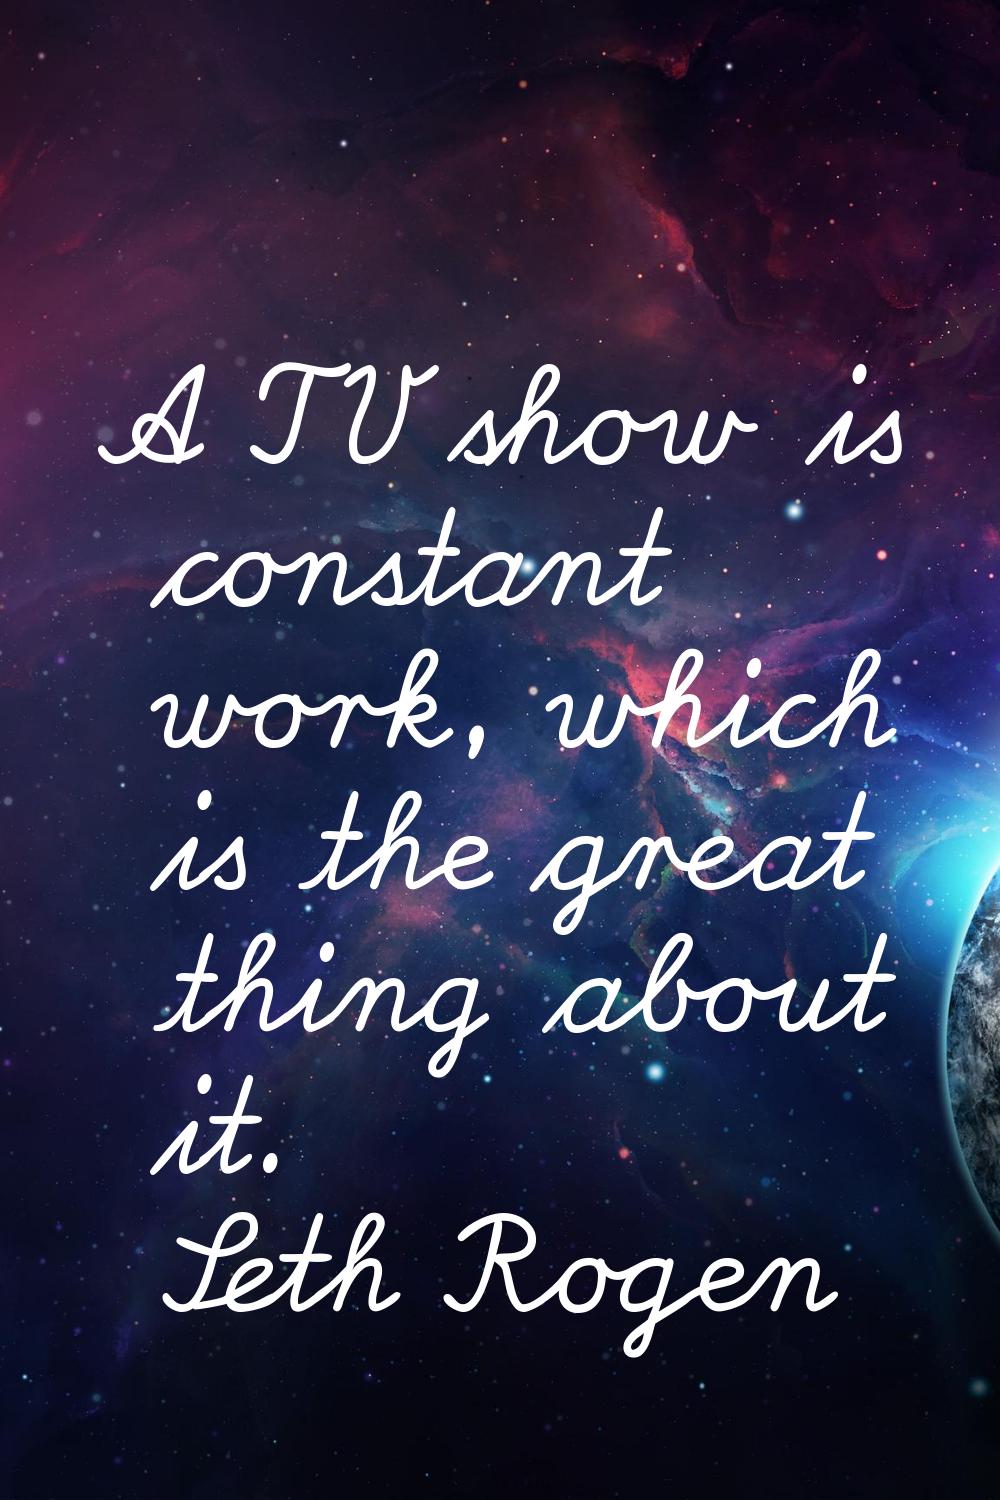 A TV show is constant work, which is the great thing about it.